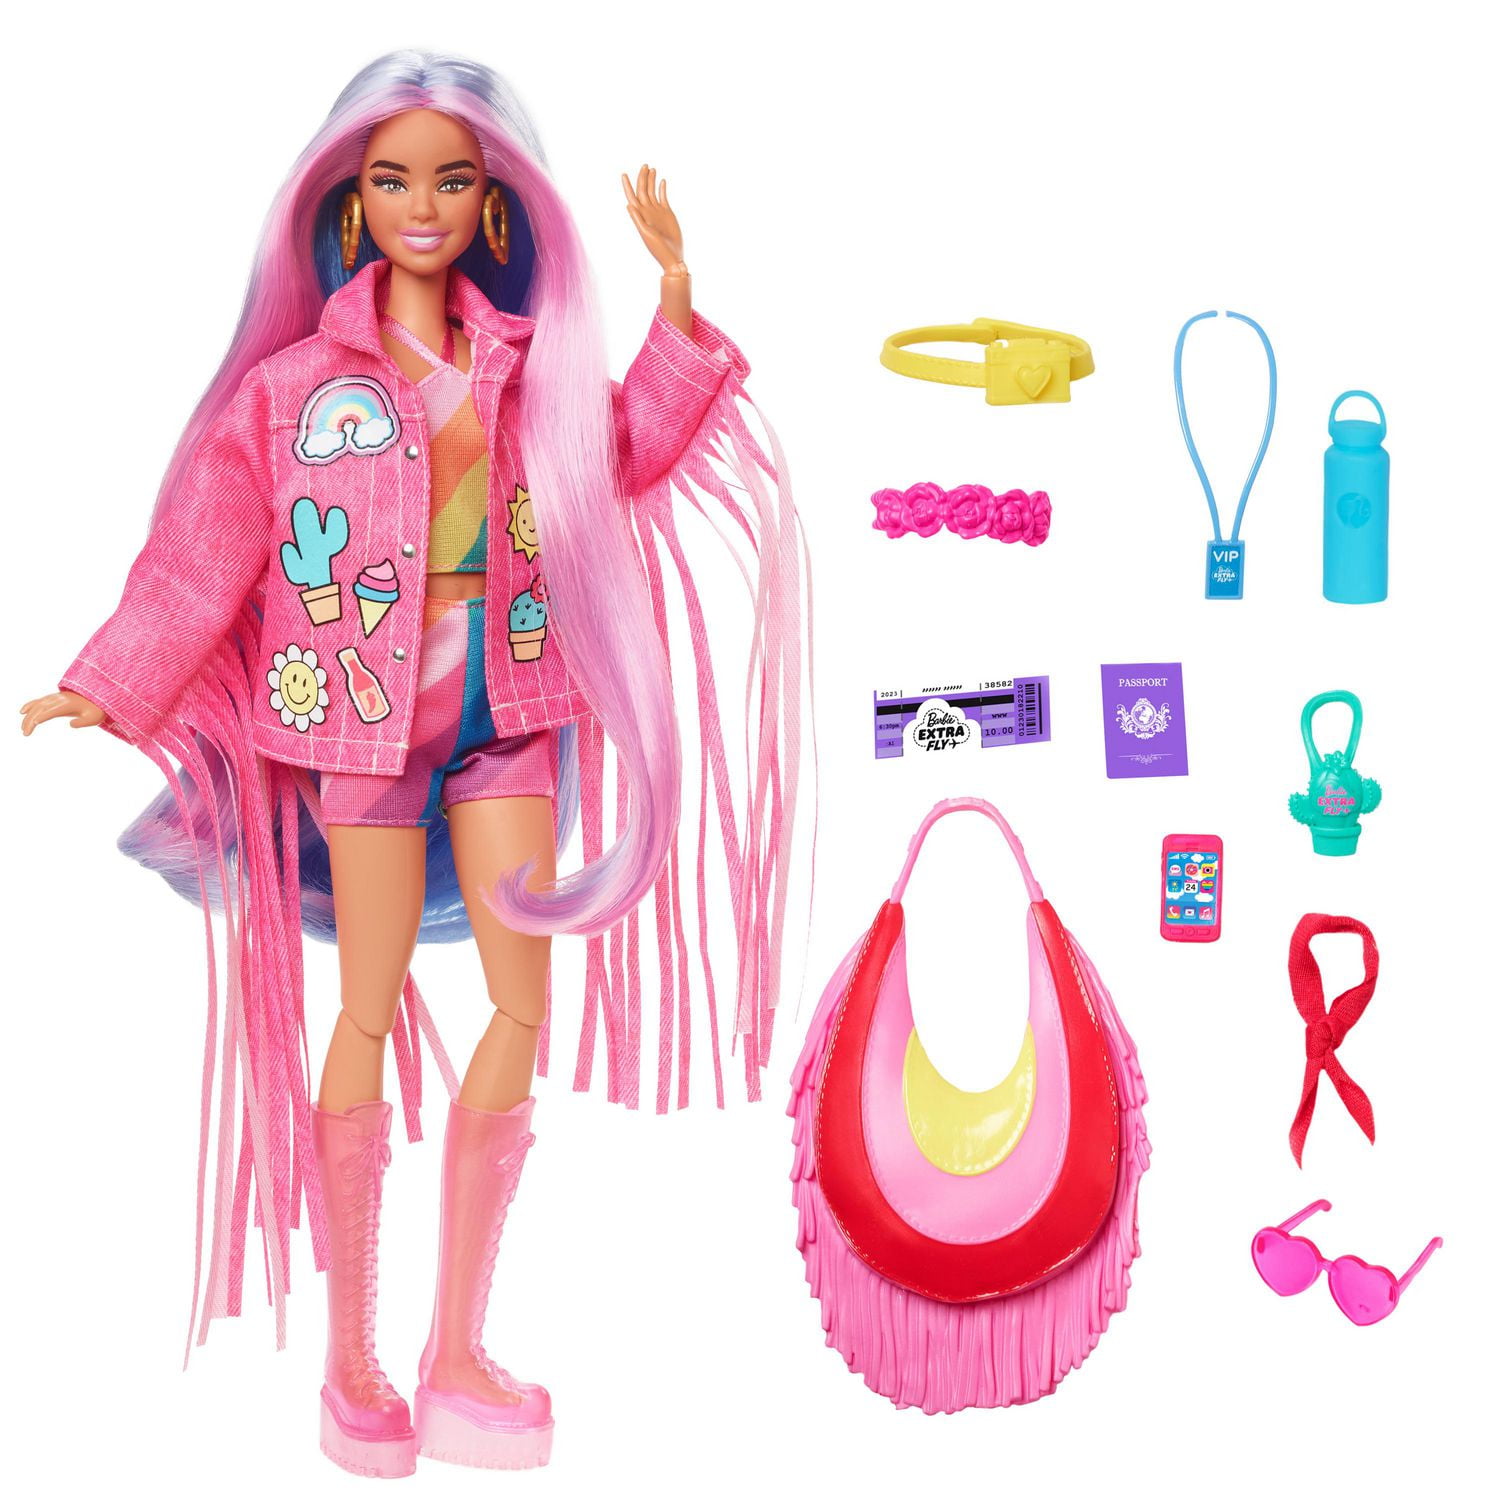 Barbie Doll Styling Head, Blond Hair with 20 Colorful Accessories, Ages 3+  